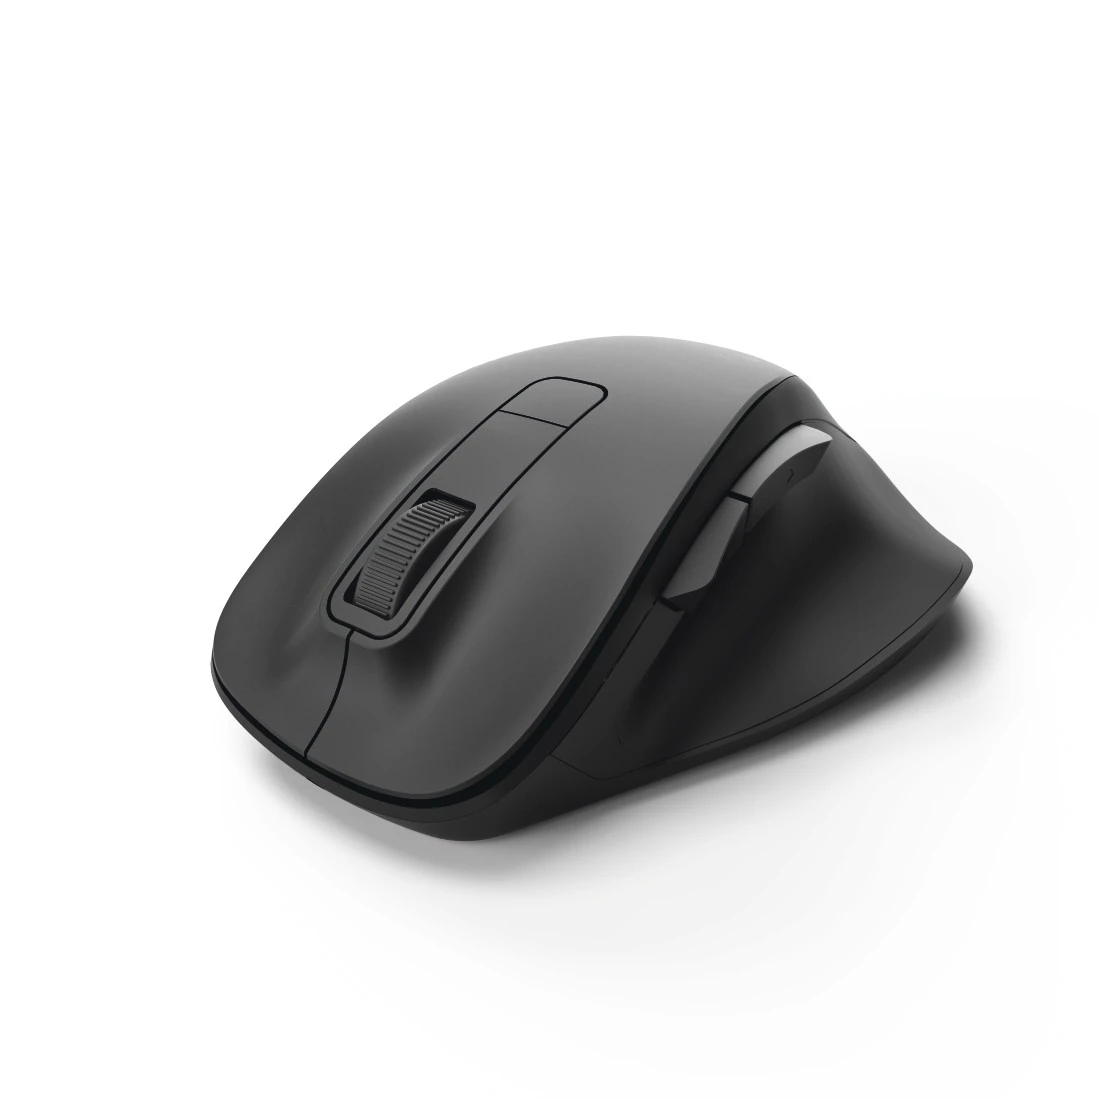 You Recently Viewed Hama 00182632 MW-500 Optical 6-Button Wireless Mouse, black Image